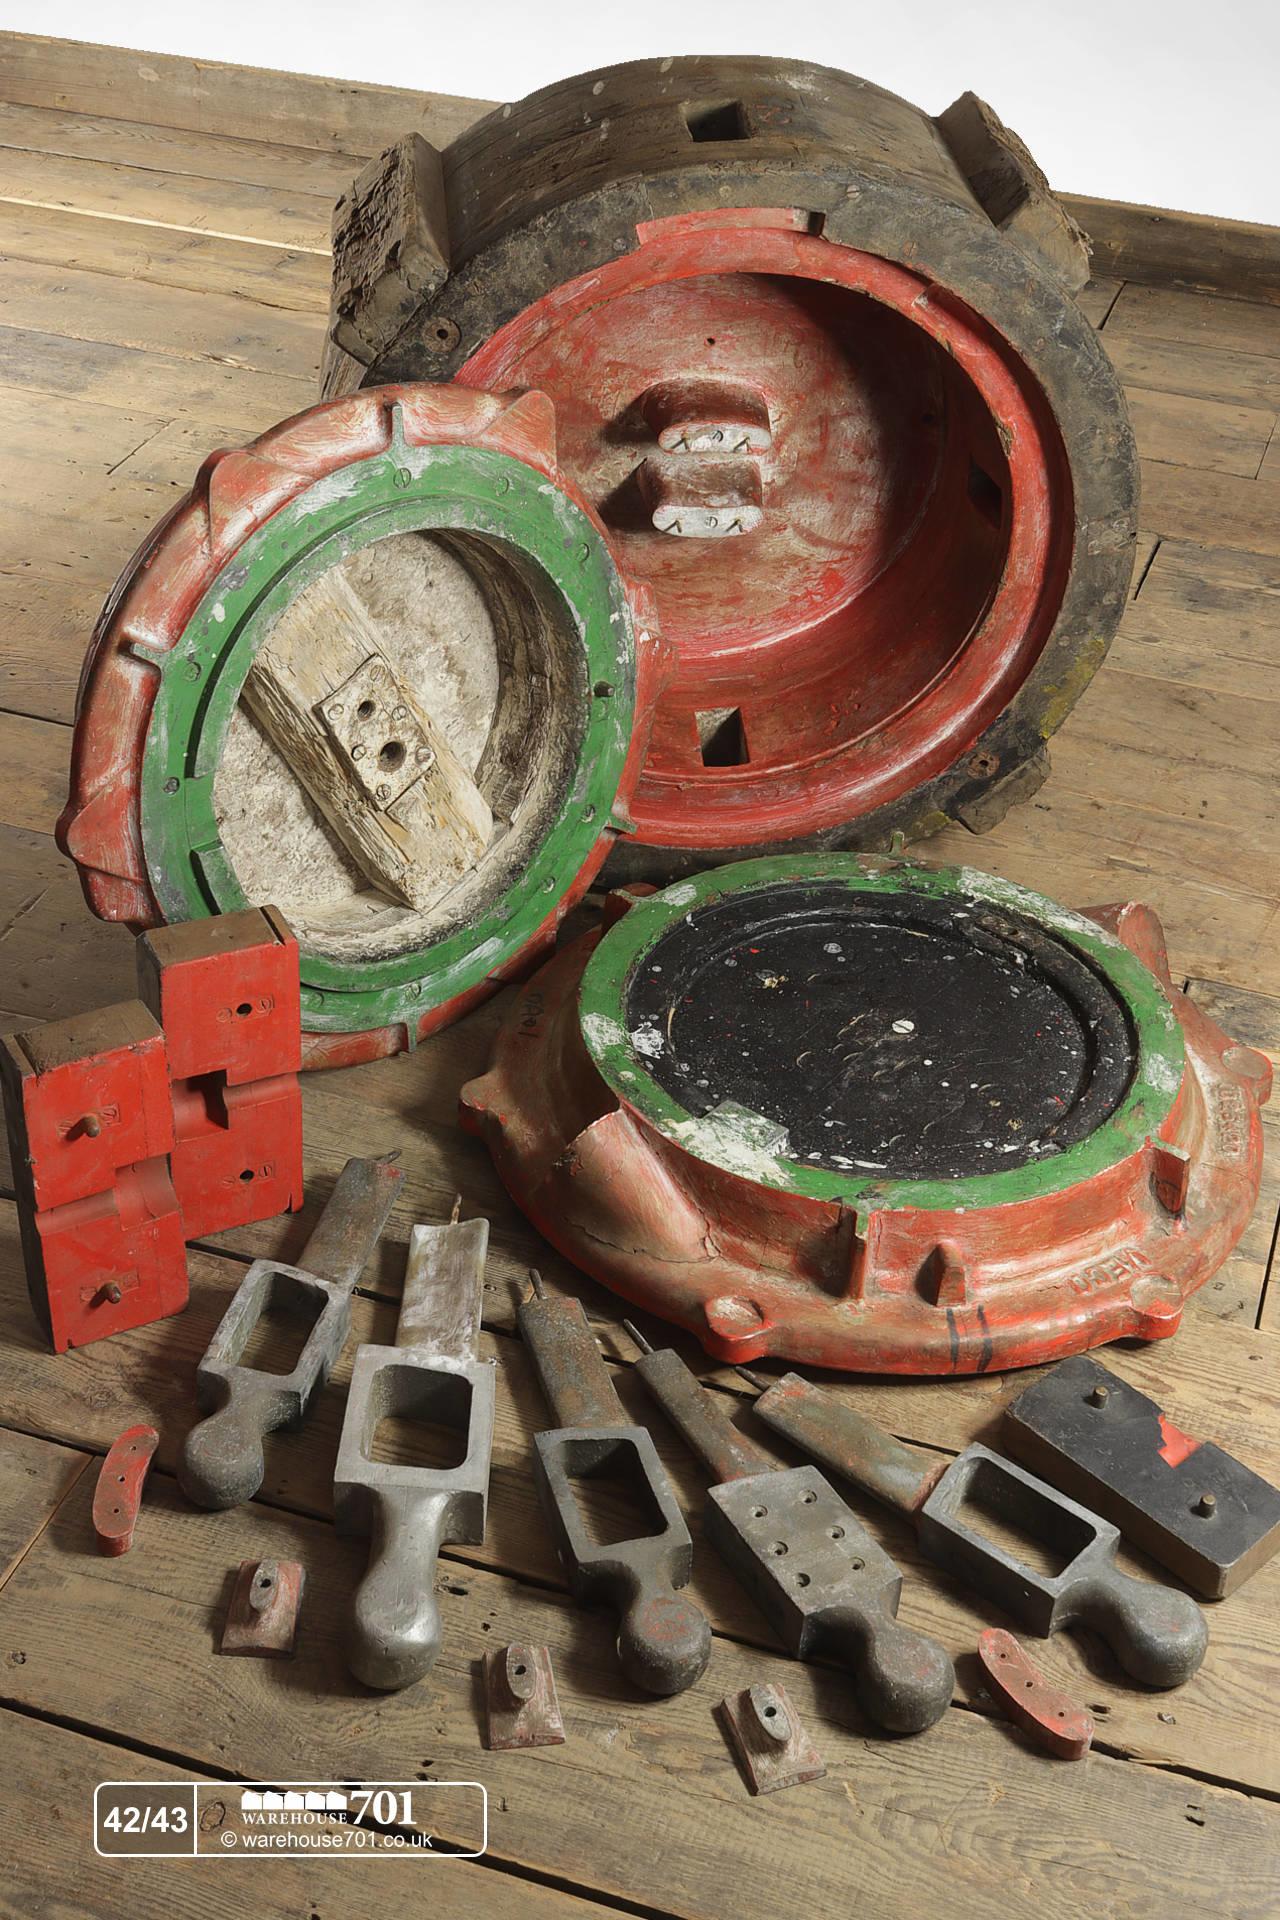 Reclaimed Foundry Industrial Patterns or Moulds (No's 42, 43) for Shop, Retail and Home Display #4